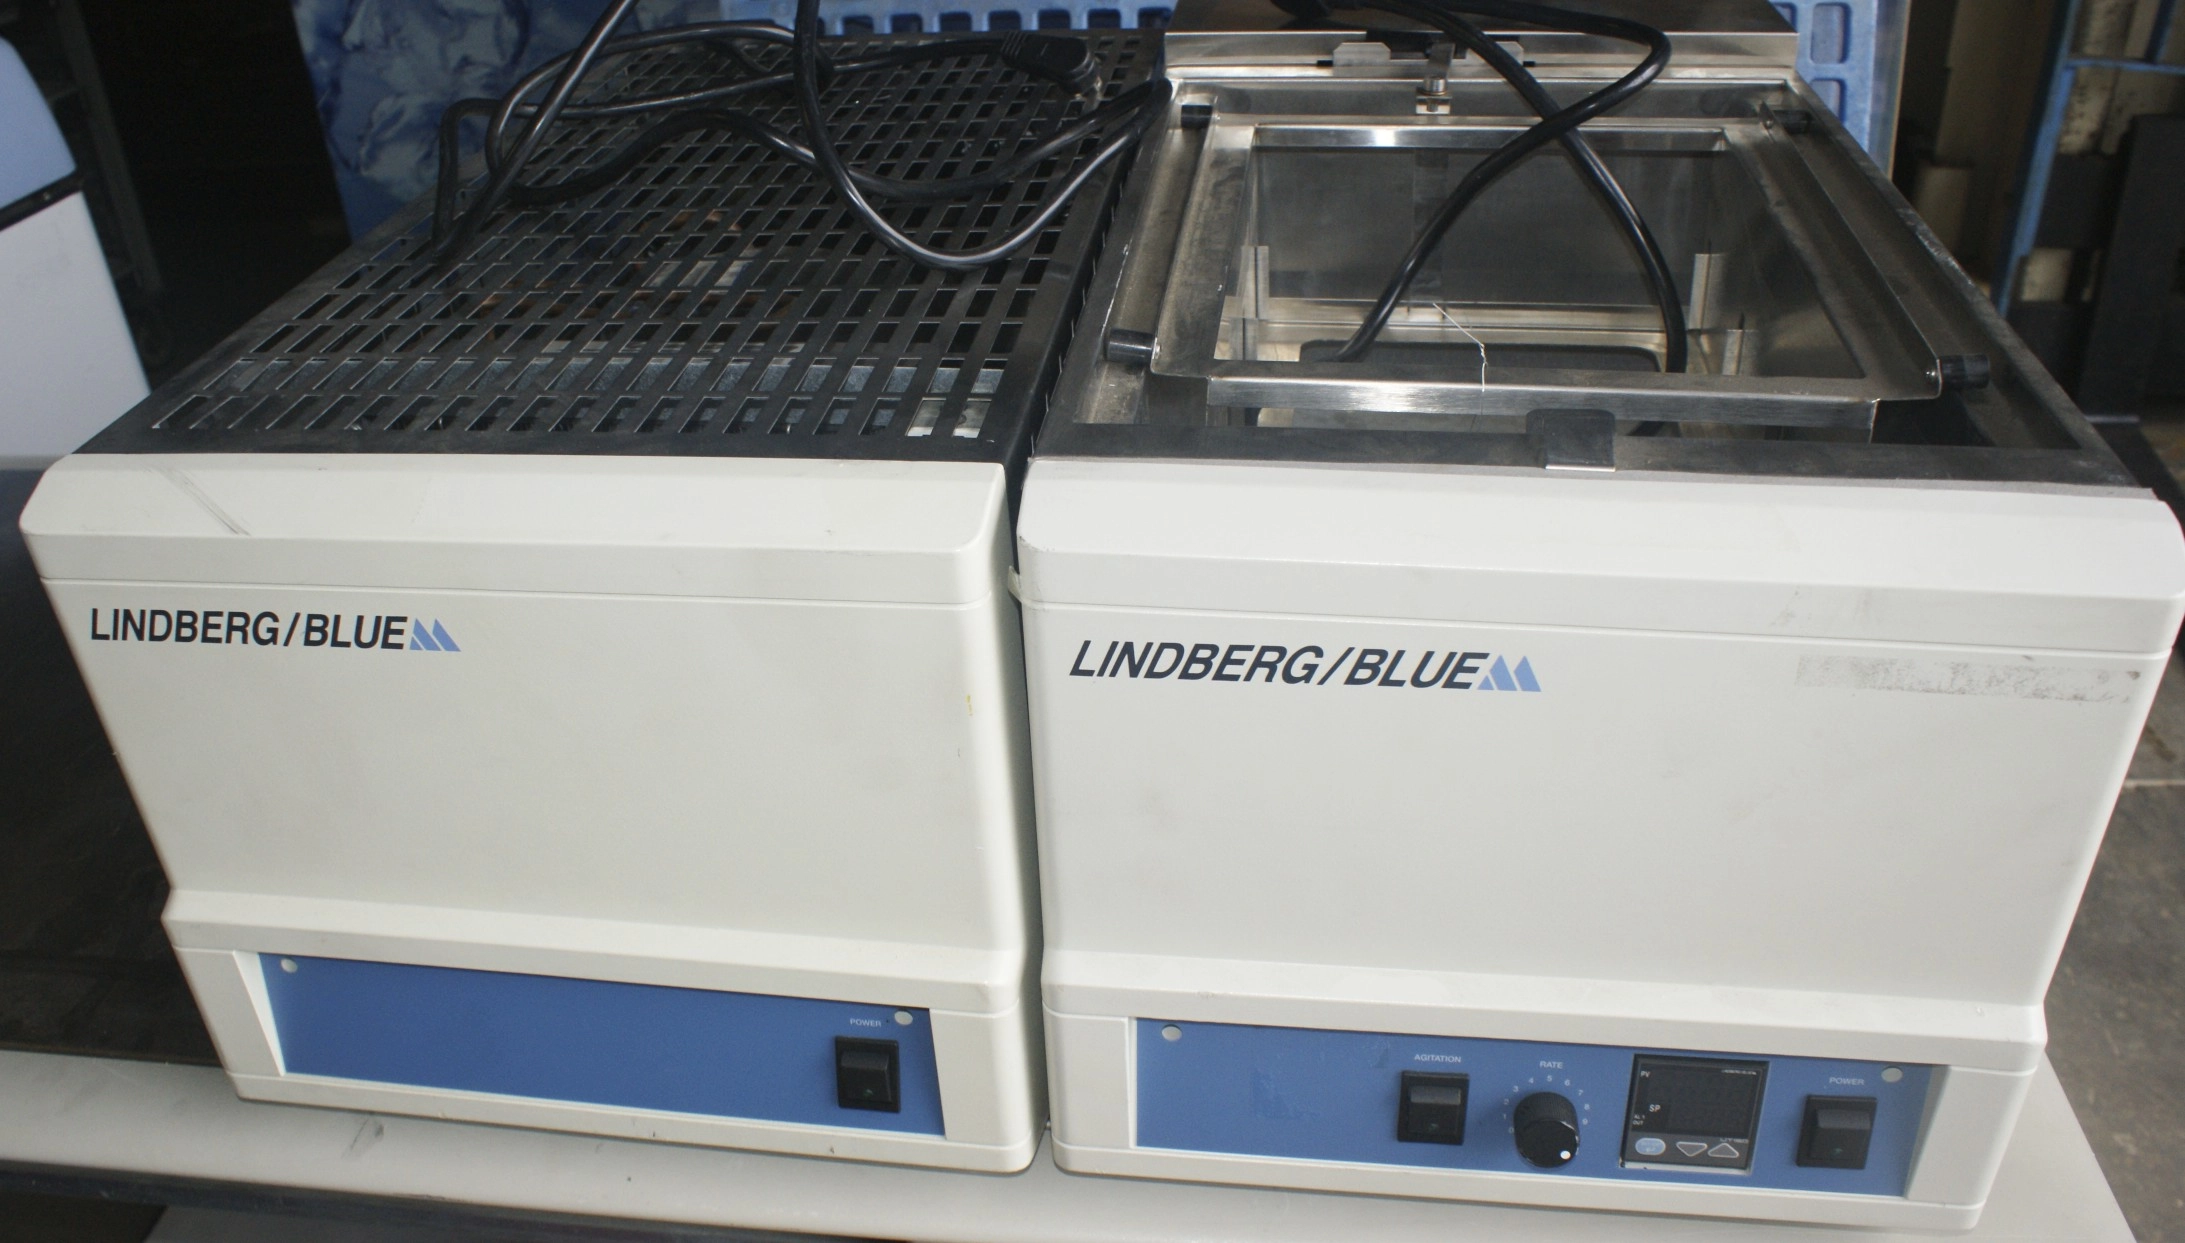 Thermo Fisher Scientific Shaking Circulating Water Baths Heated or Heated/Refrigerated, Lindberg/Blue M Refrigerated Shaking